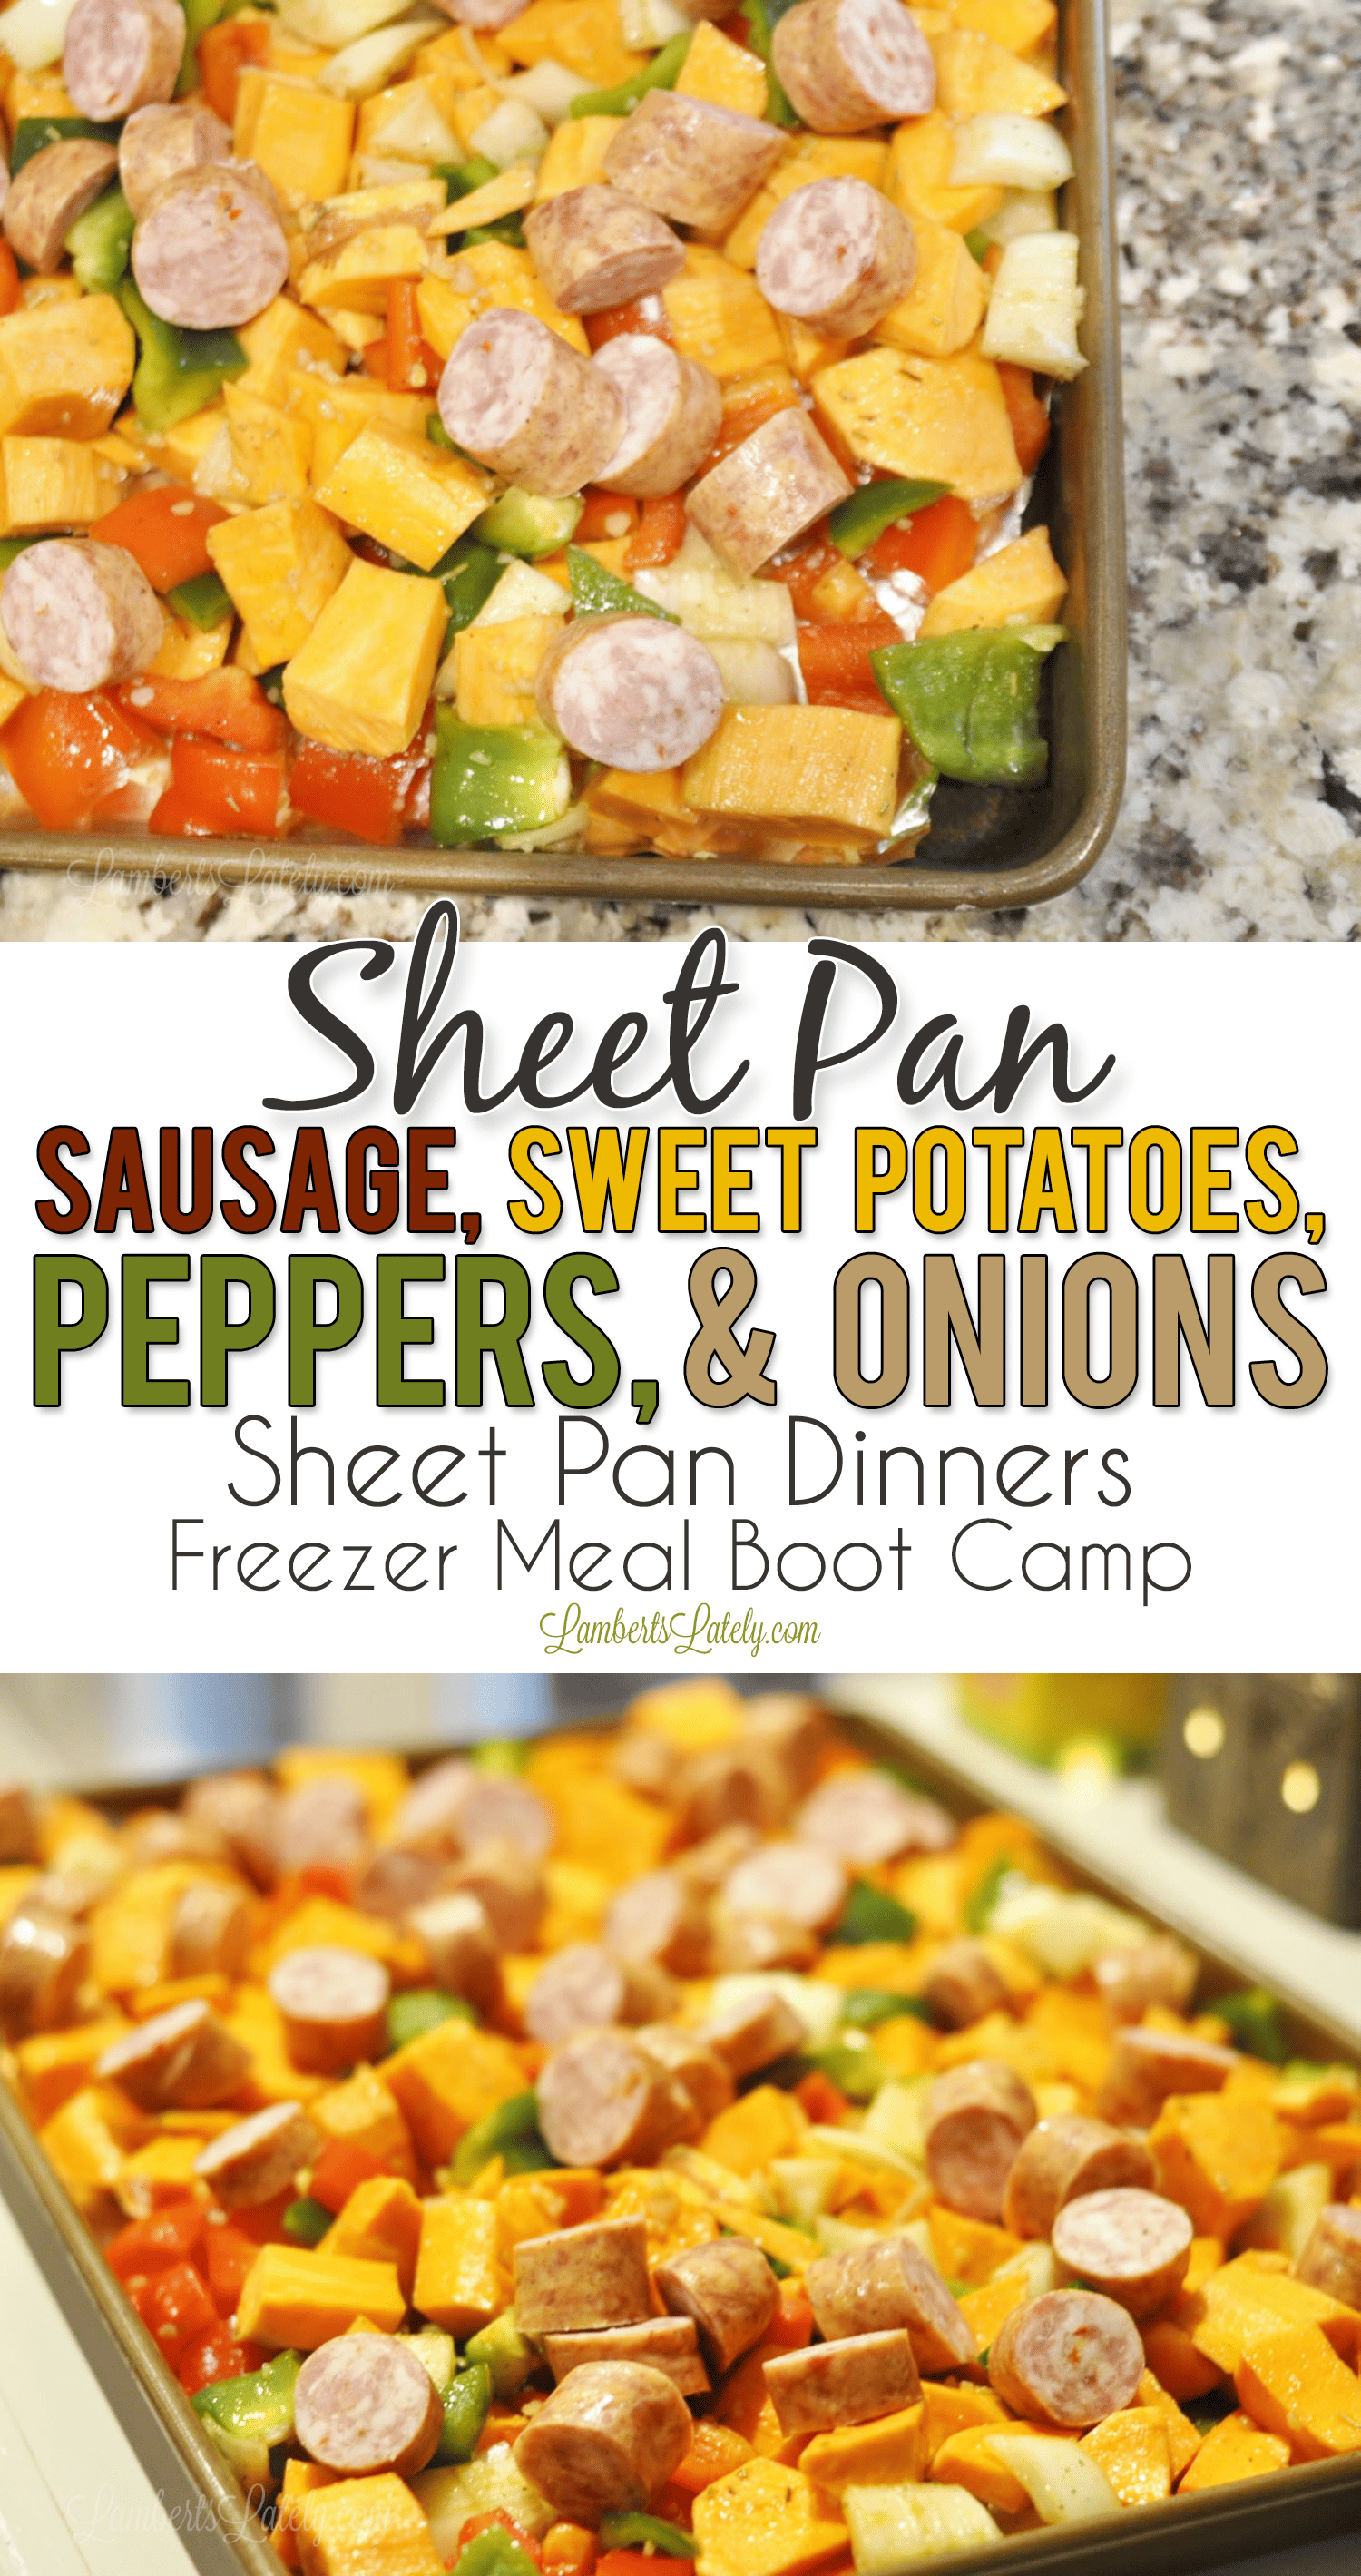 Sheet Pan Sausage, Sweet Potatoes, Peppers, and Onions sheet pan dinners freezer meal boot camp.